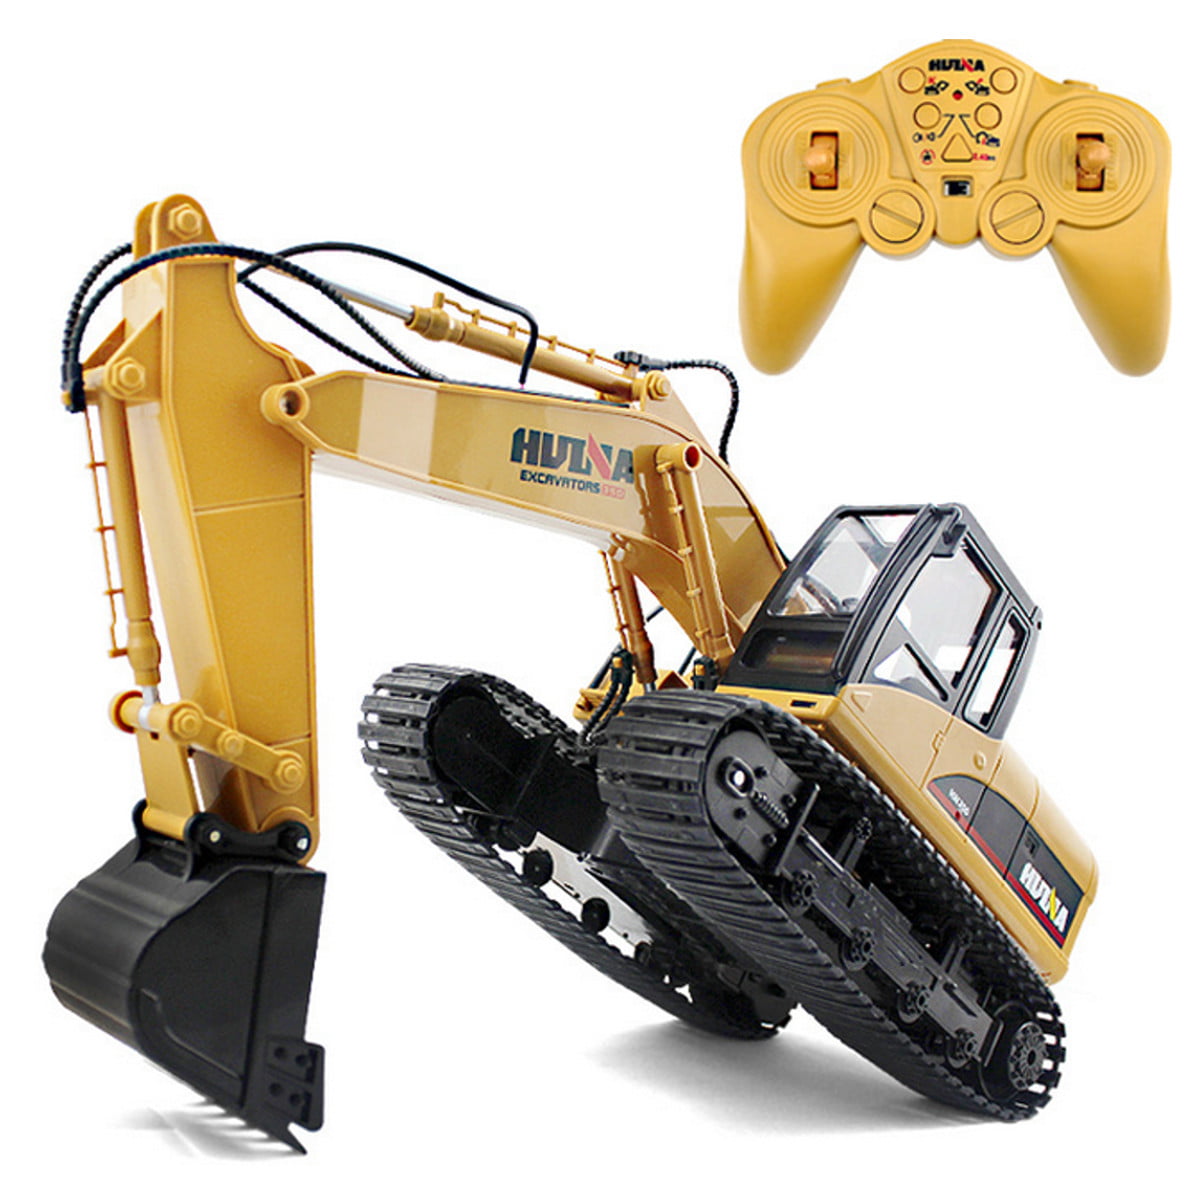 backhoe rc toy